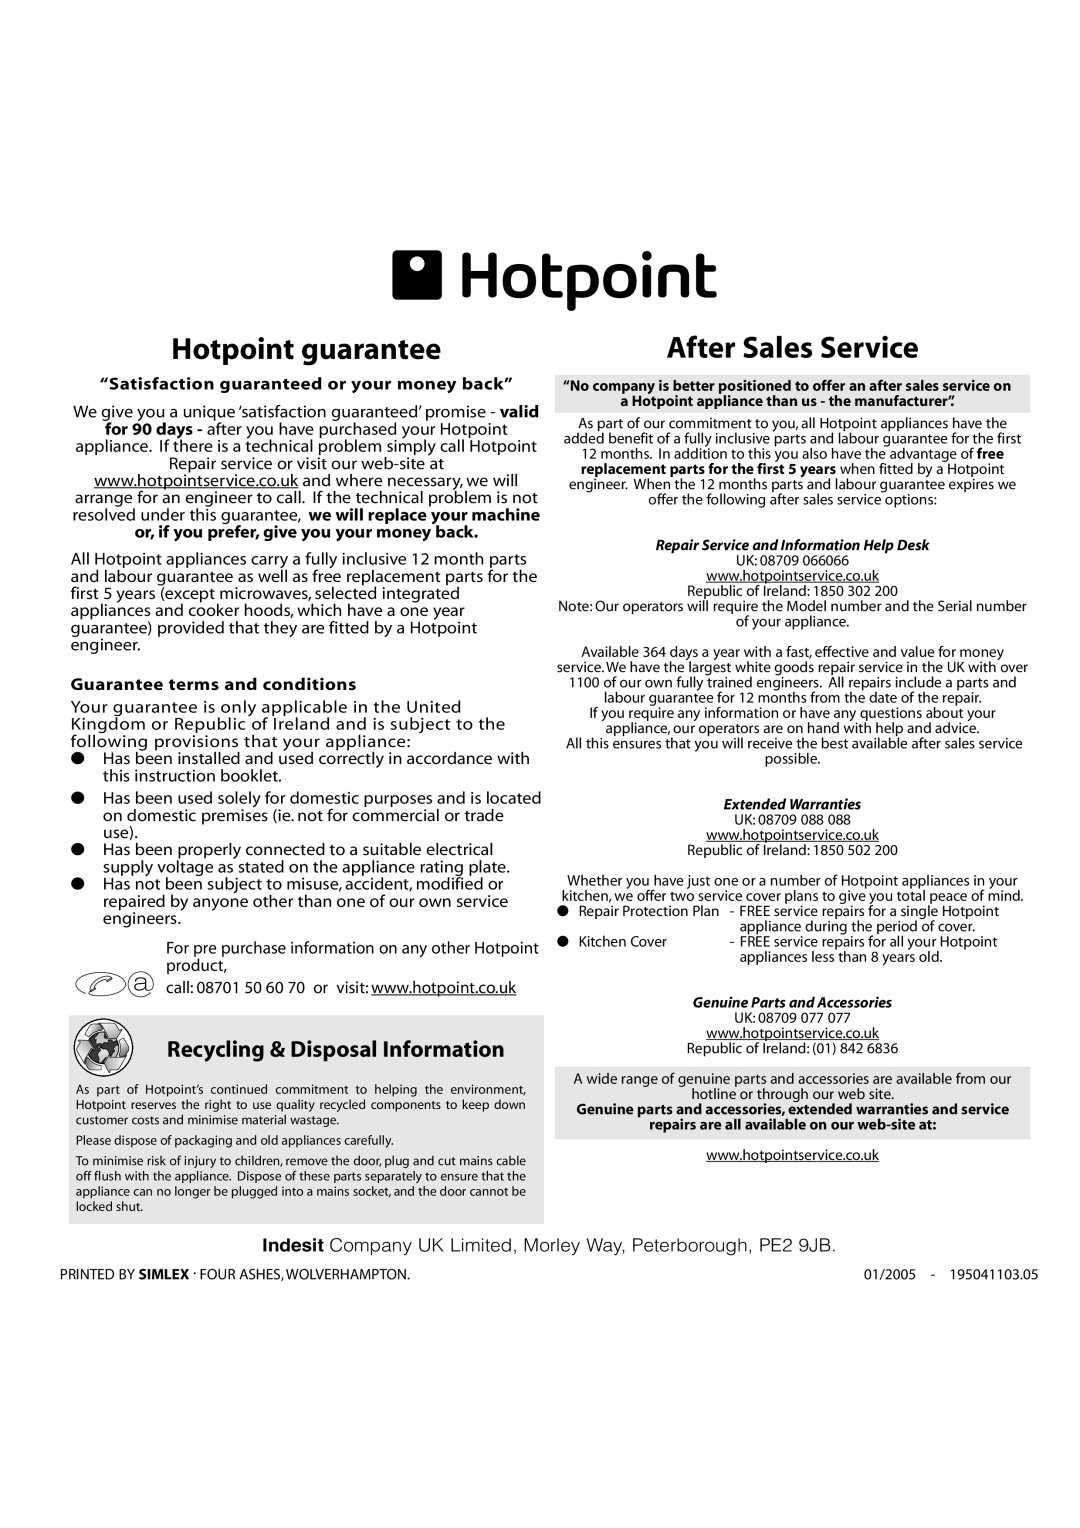 Hotpoint WF225 Recycling & Disposal Information, Hotpoint guarantee, After Sales Service, Guarantee terms and conditions 